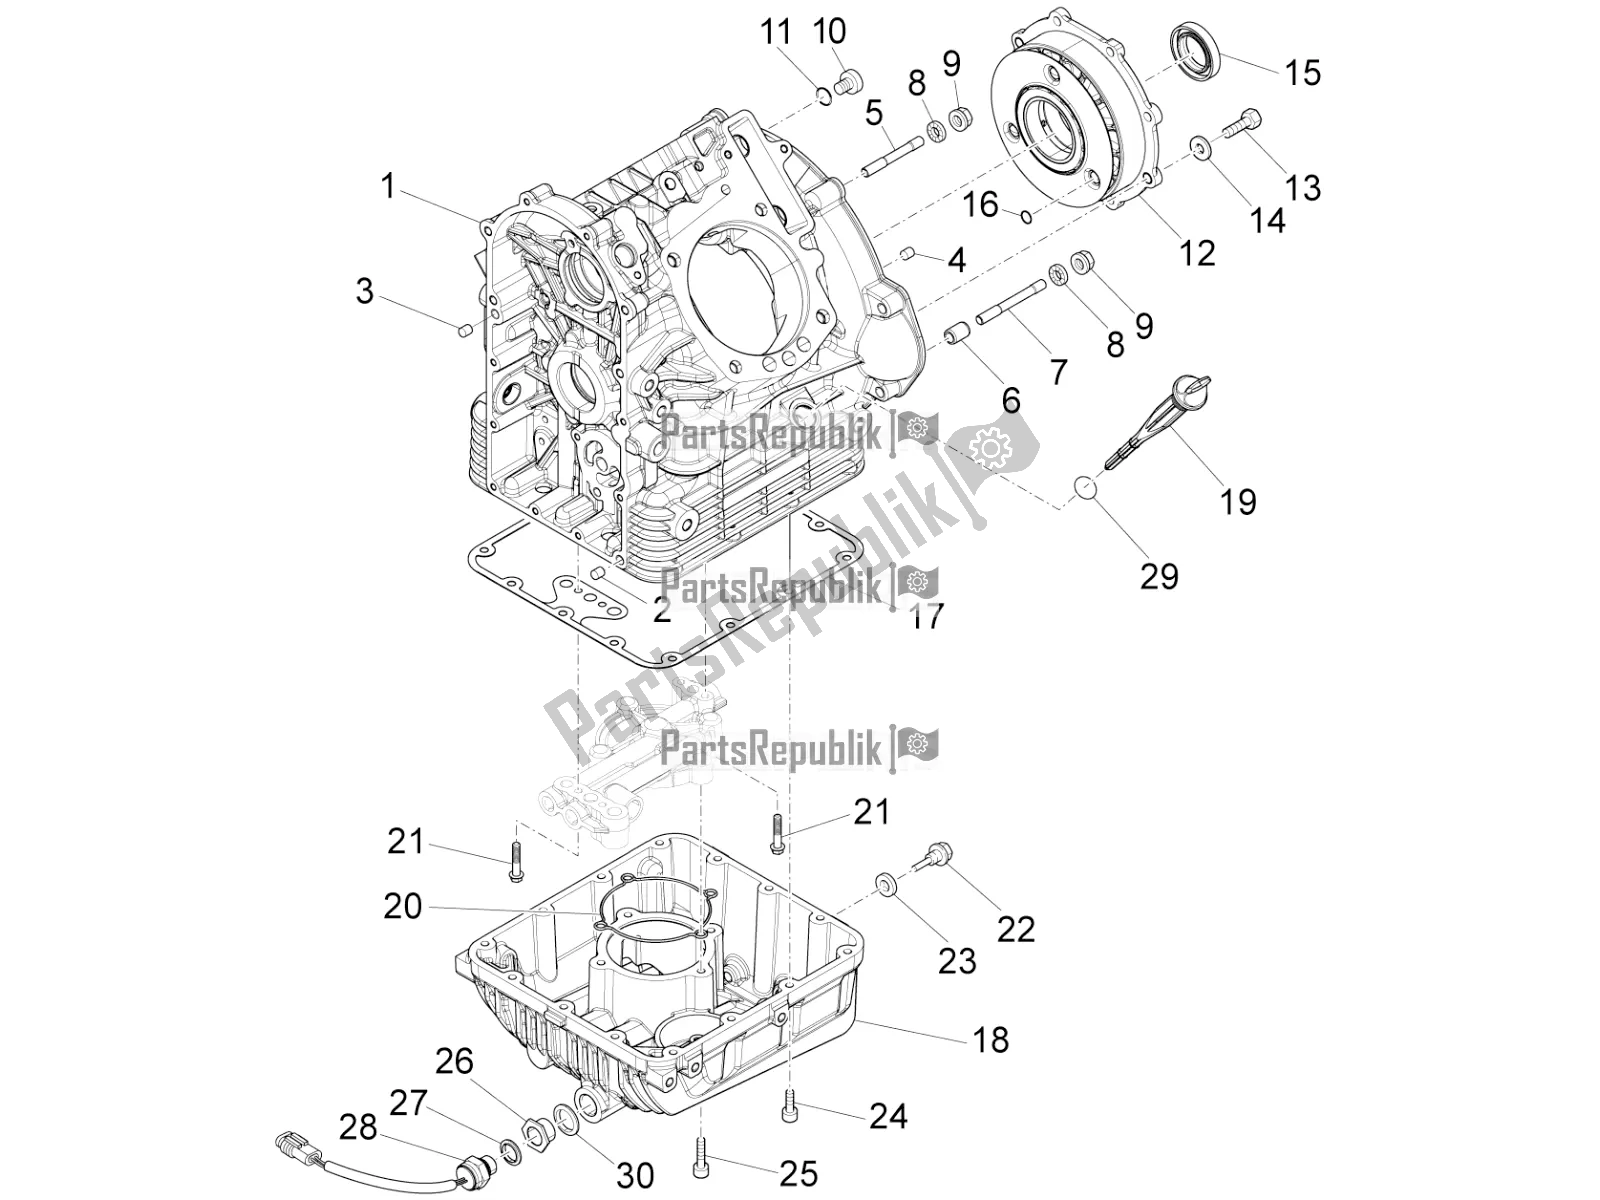 All parts for the Crankcases I of the Moto-Guzzi California 1400 Touring ABS 2021